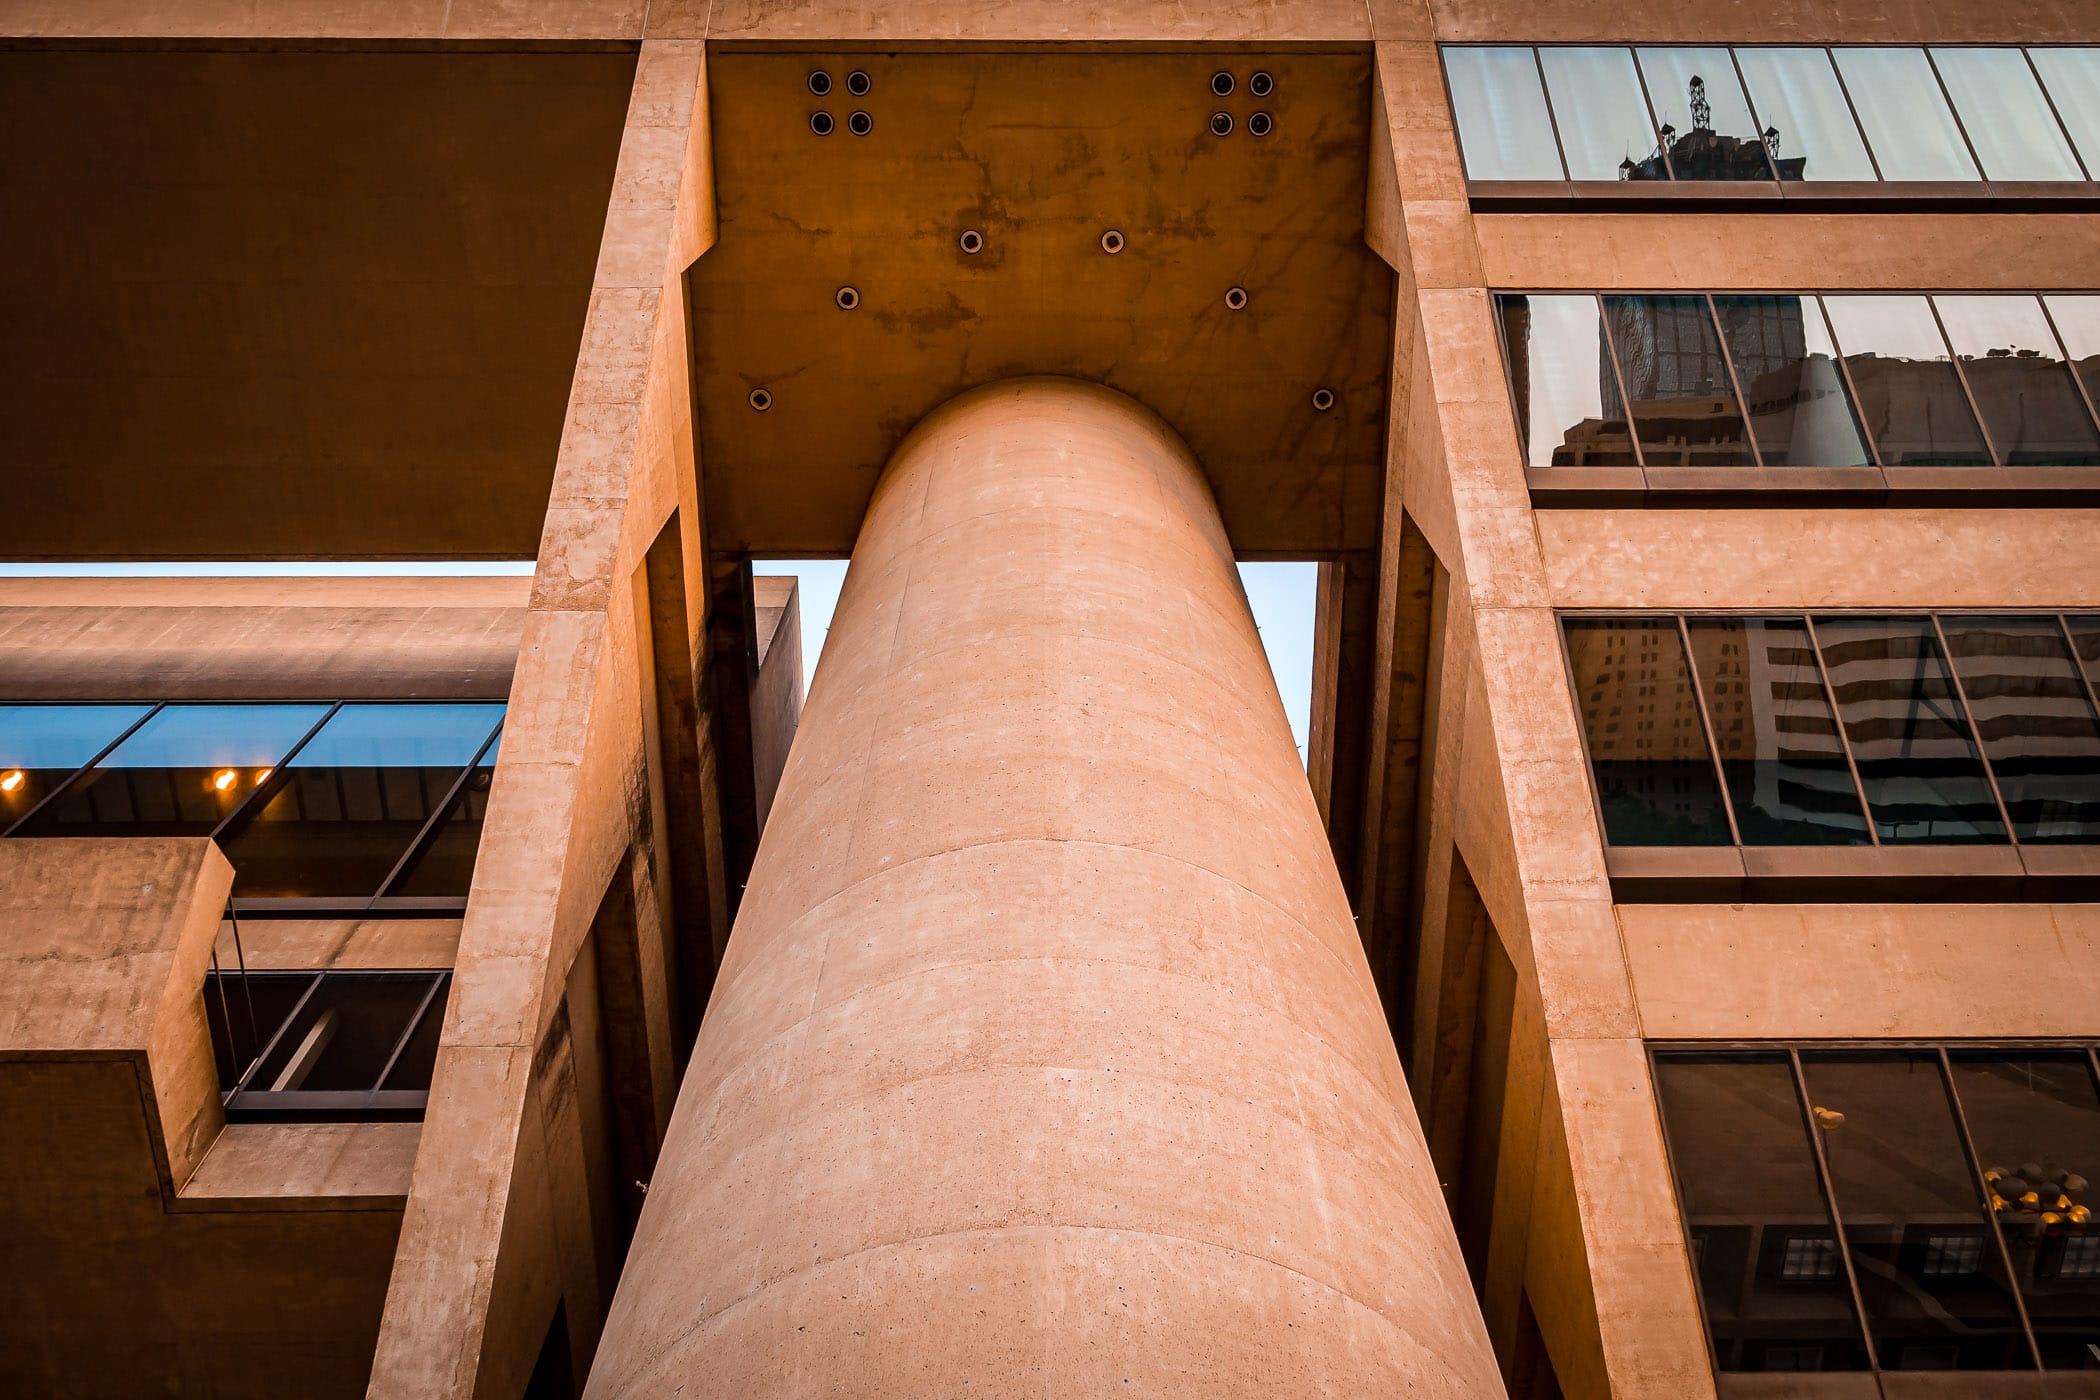 Architectural detail of the I.M. Pei-designed Dallas City Hall.